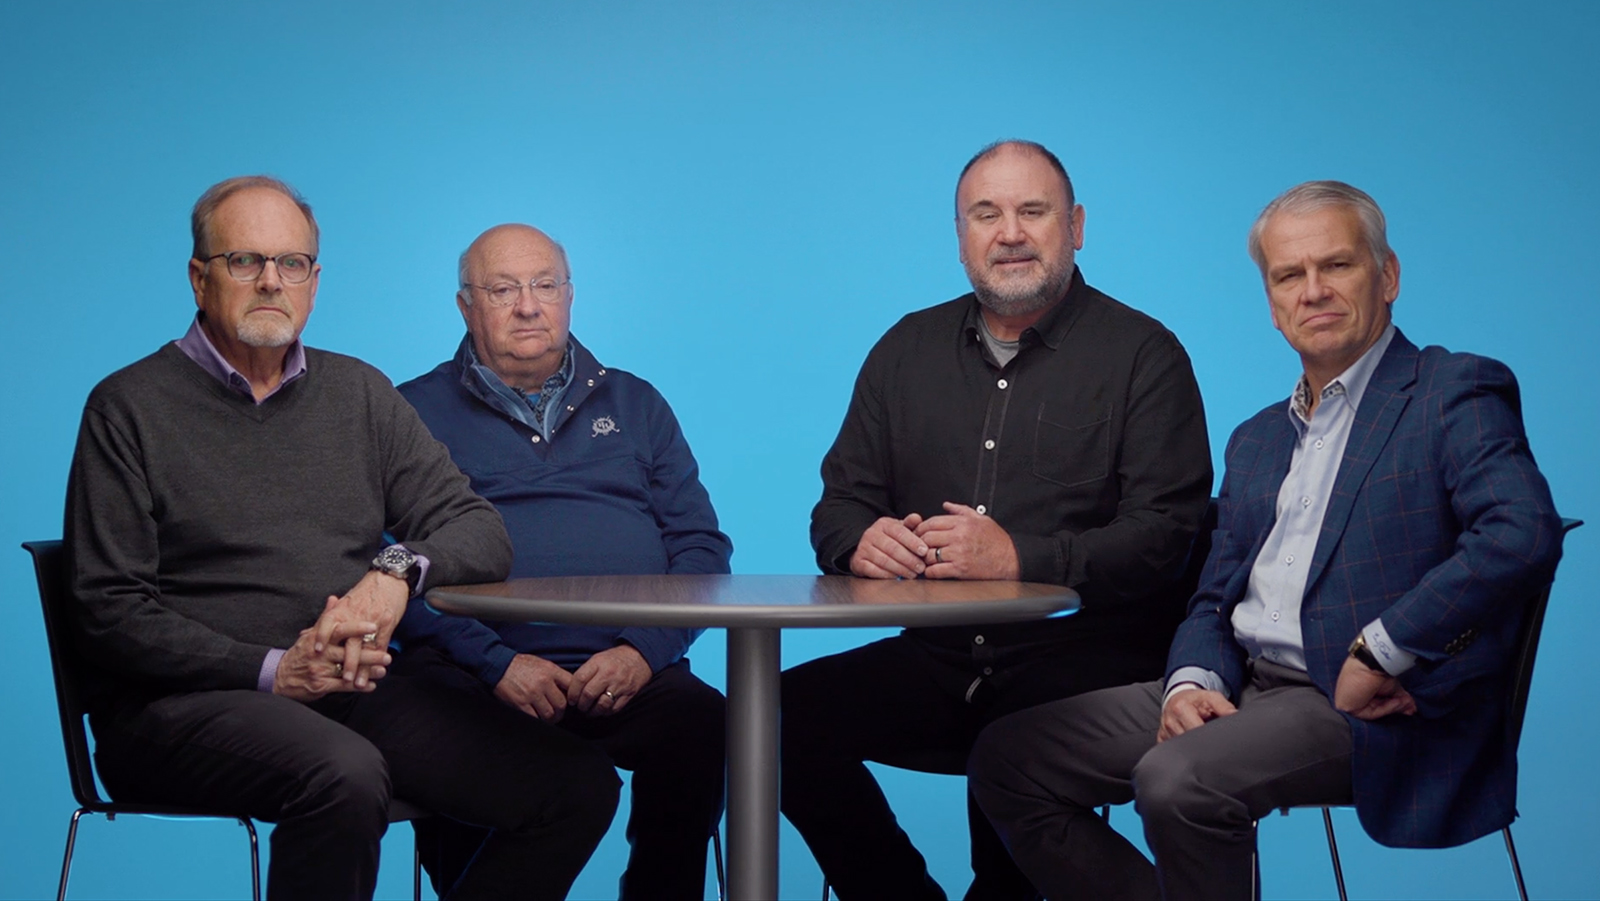 Online News Pastors Mark Hoover, from left, Mike Whitson, Steven Kyle and Benny Tate in a video about their restoration work with Johnny Hunt. Video screen grab